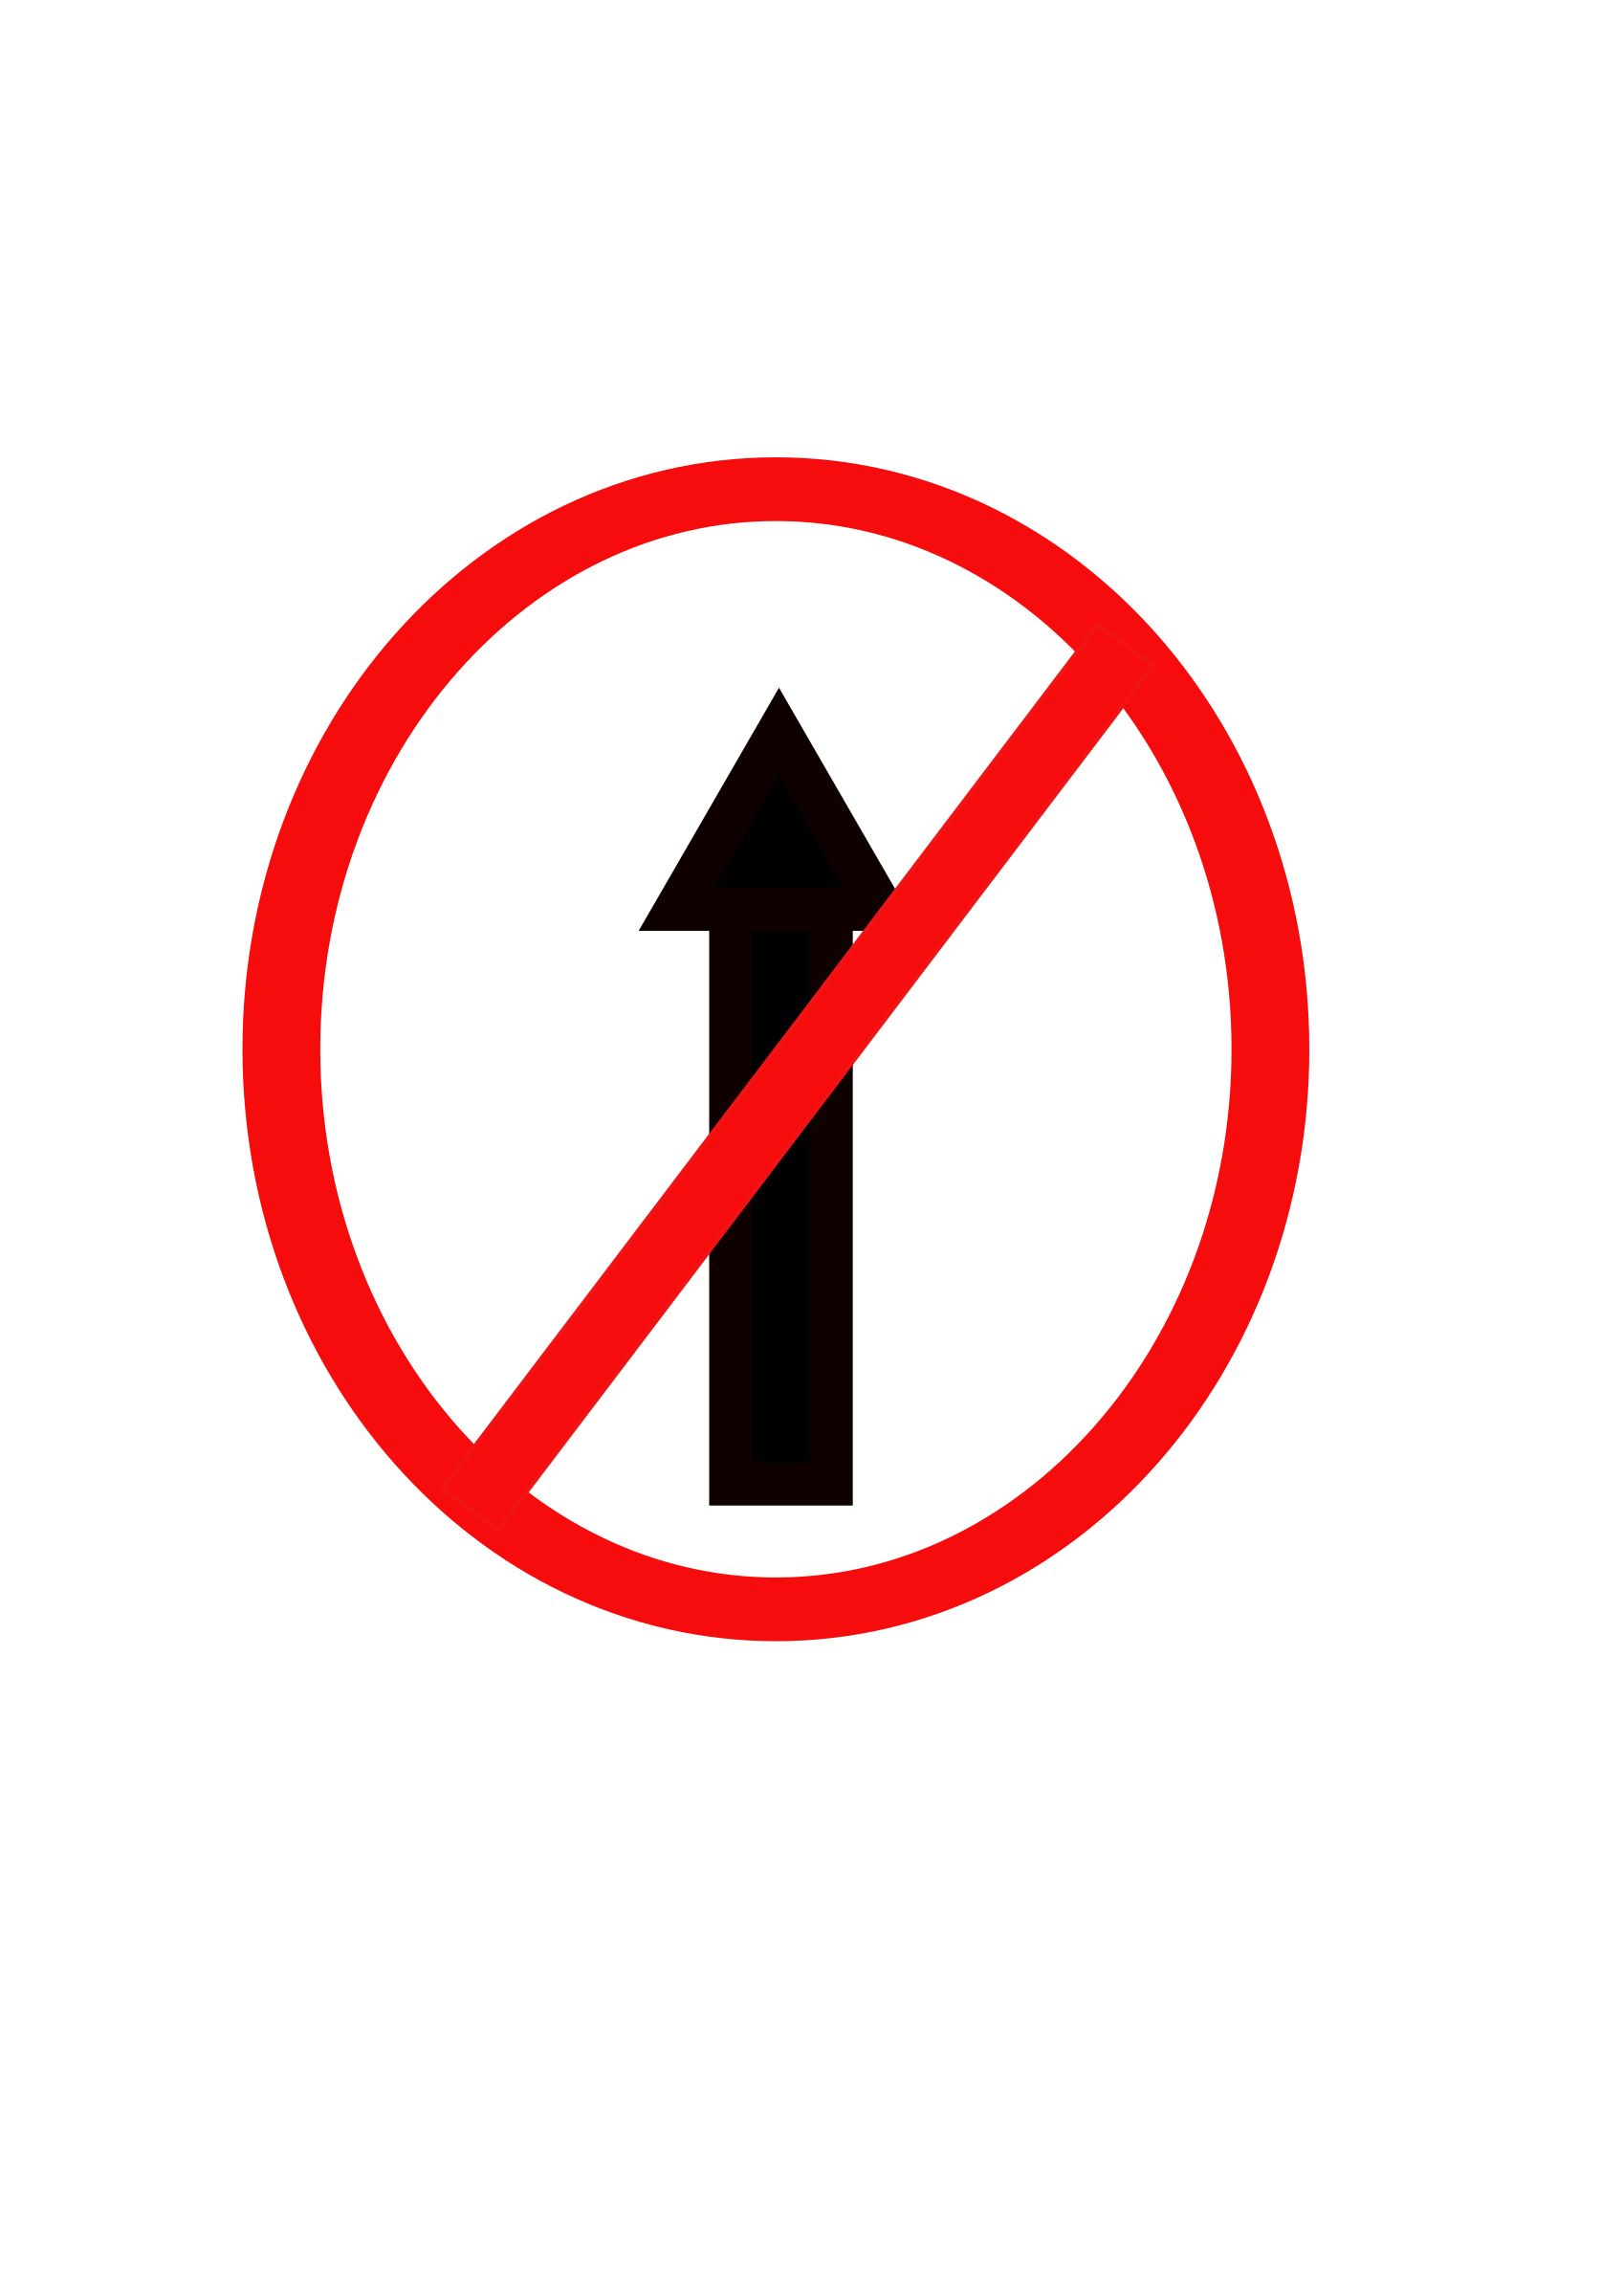 Clipart - Indian road sign - No entry